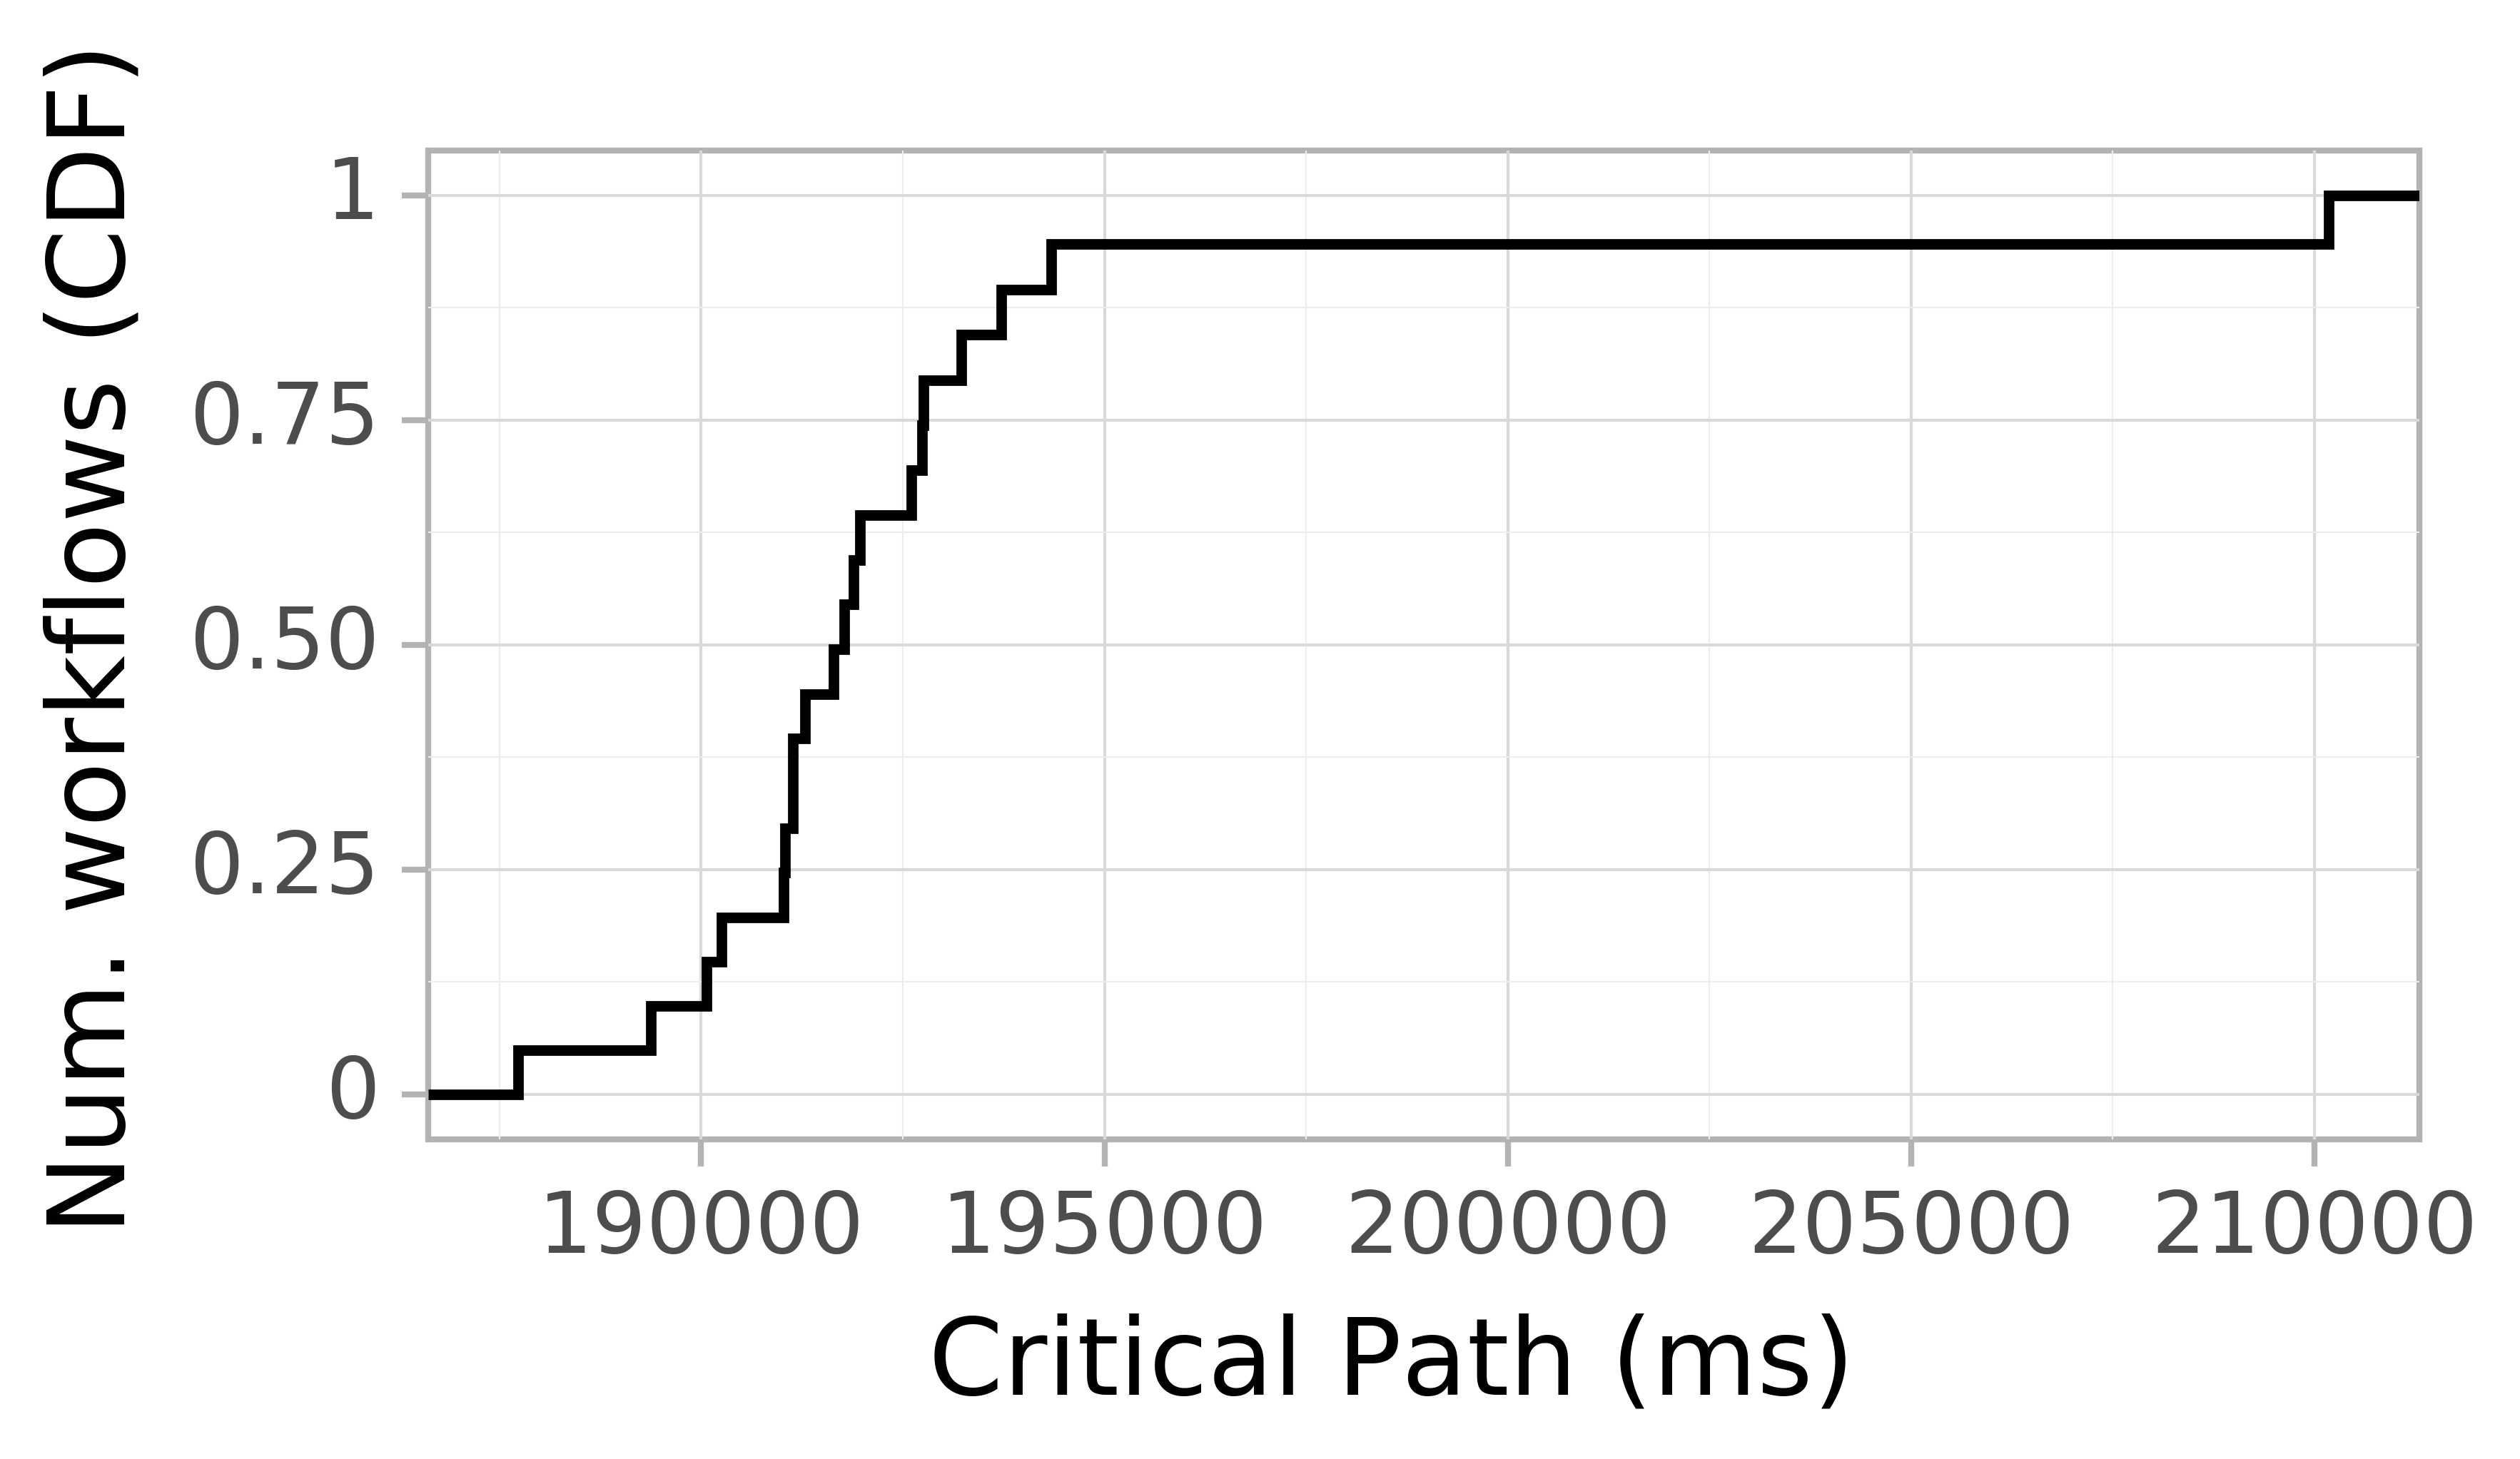 Job runtime CDF graph for the askalon-new_ee4 trace.